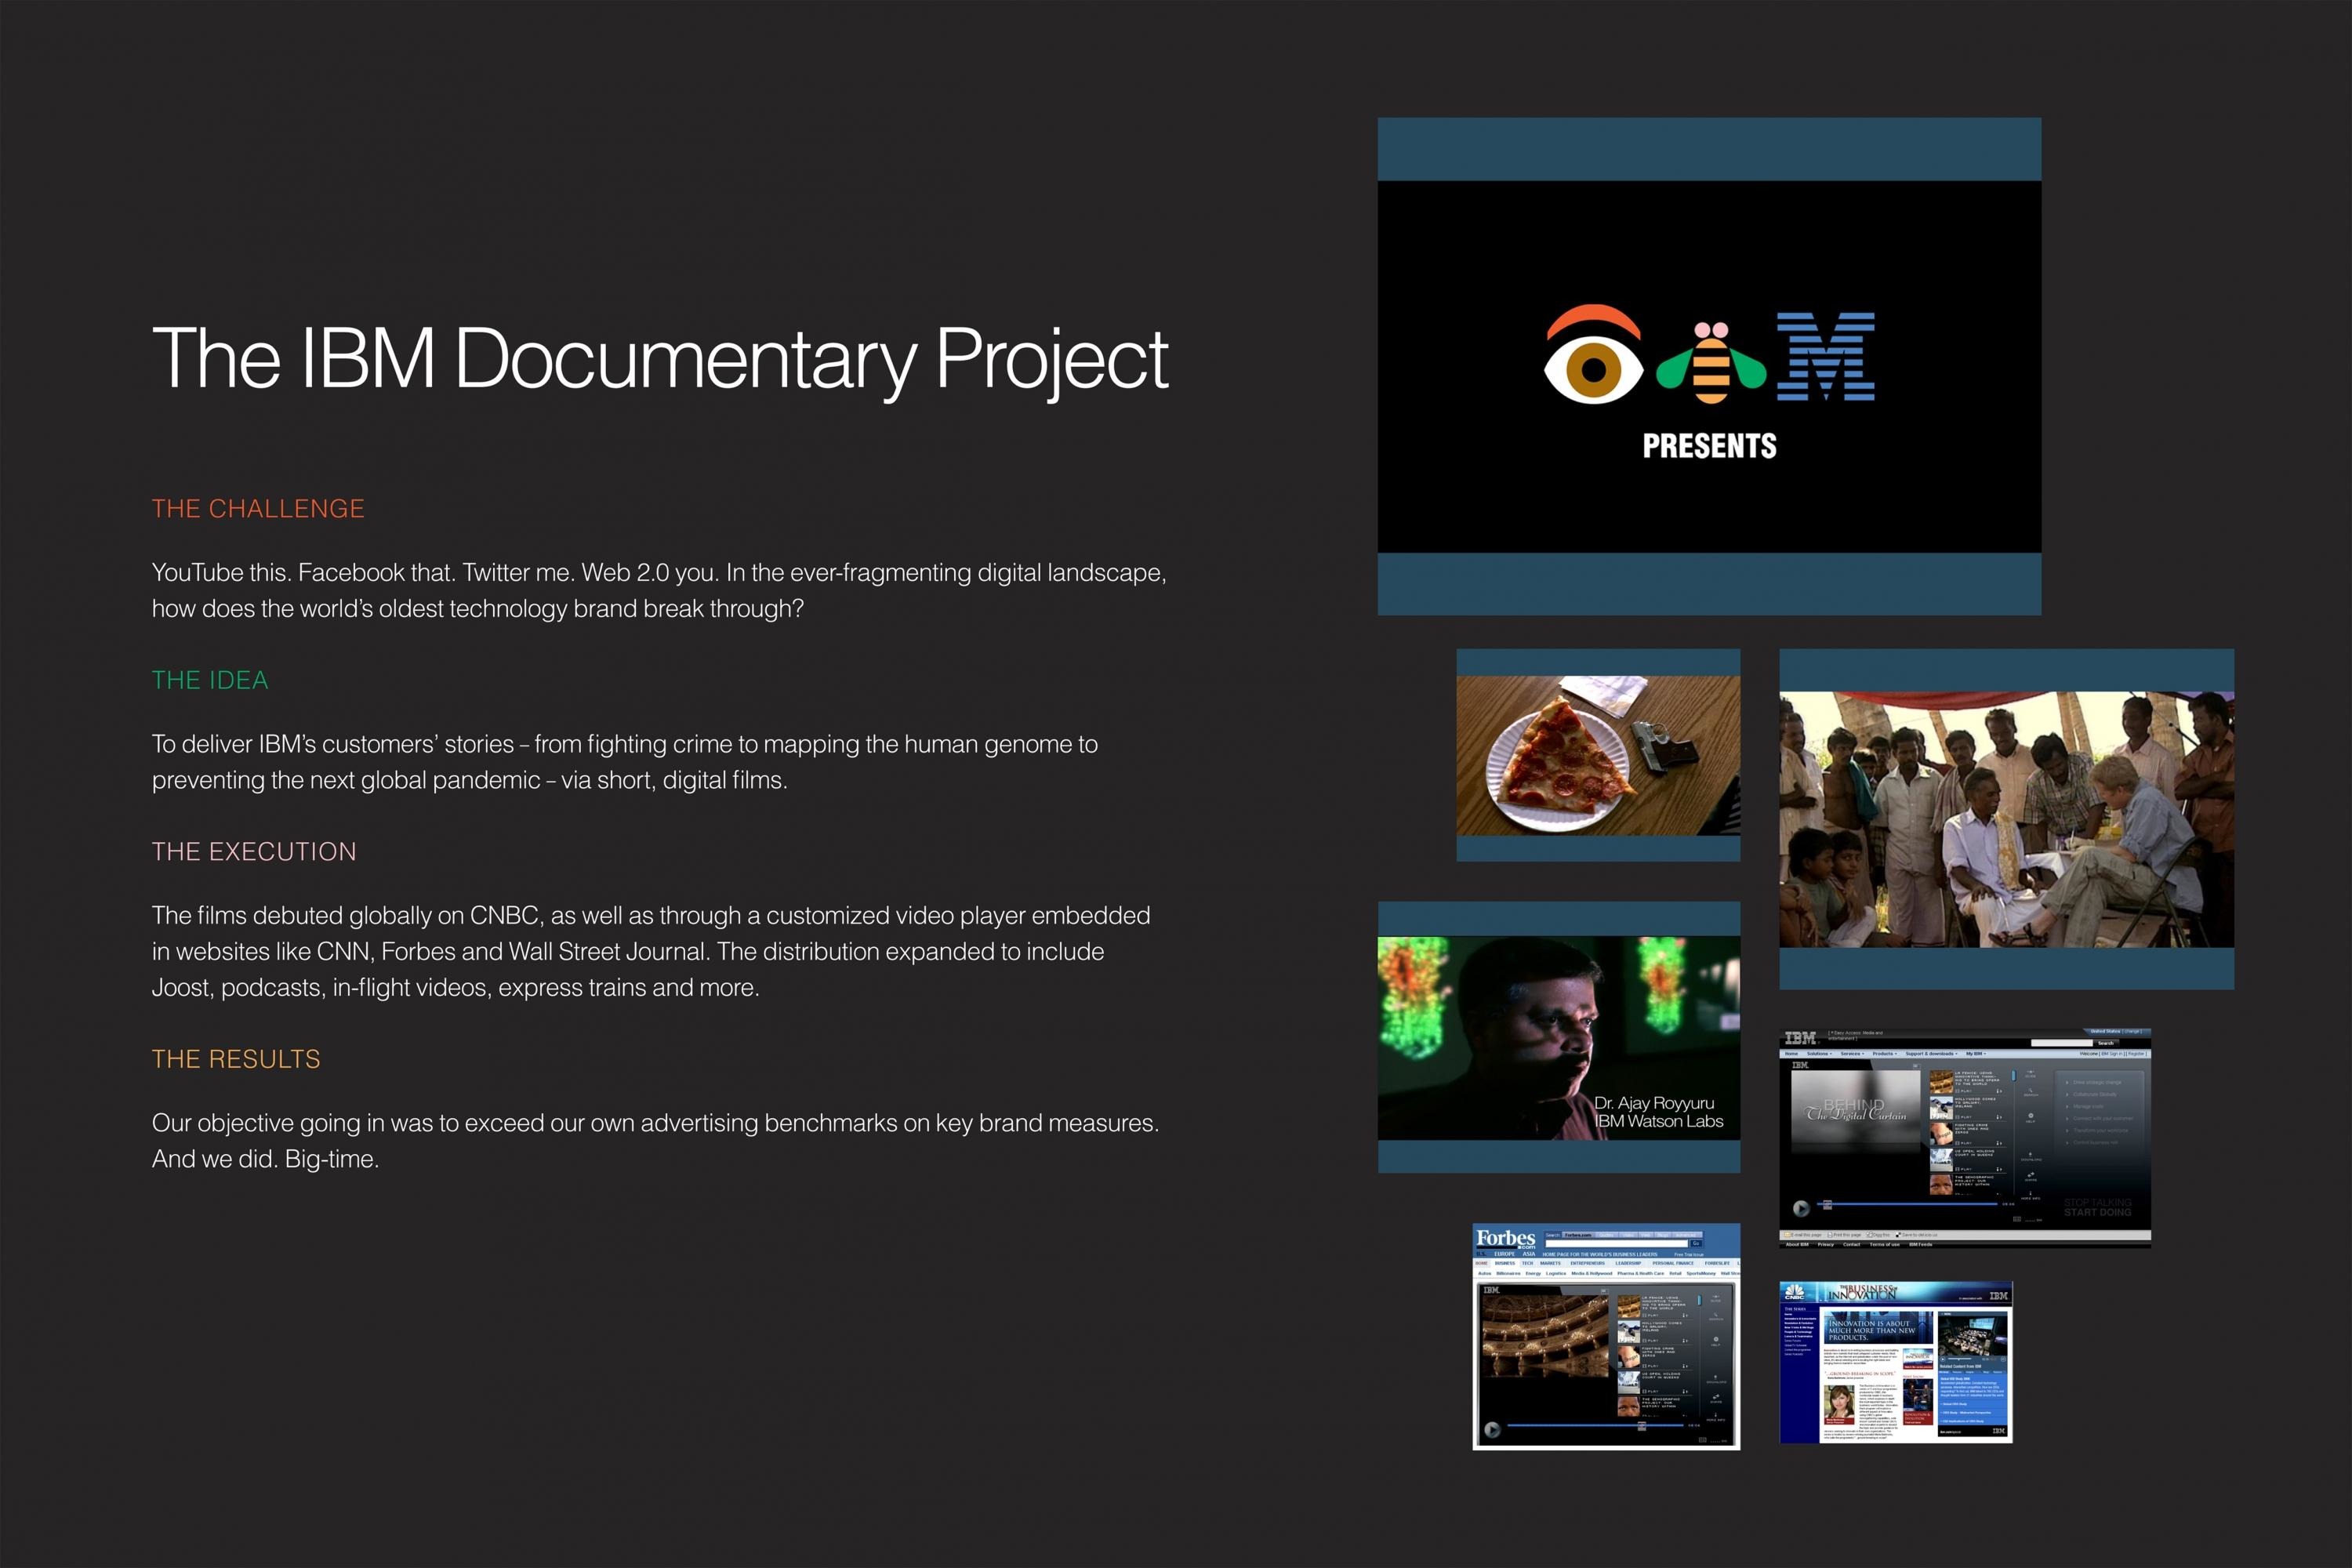 THE IBM DOCUMENTARY PROJECT